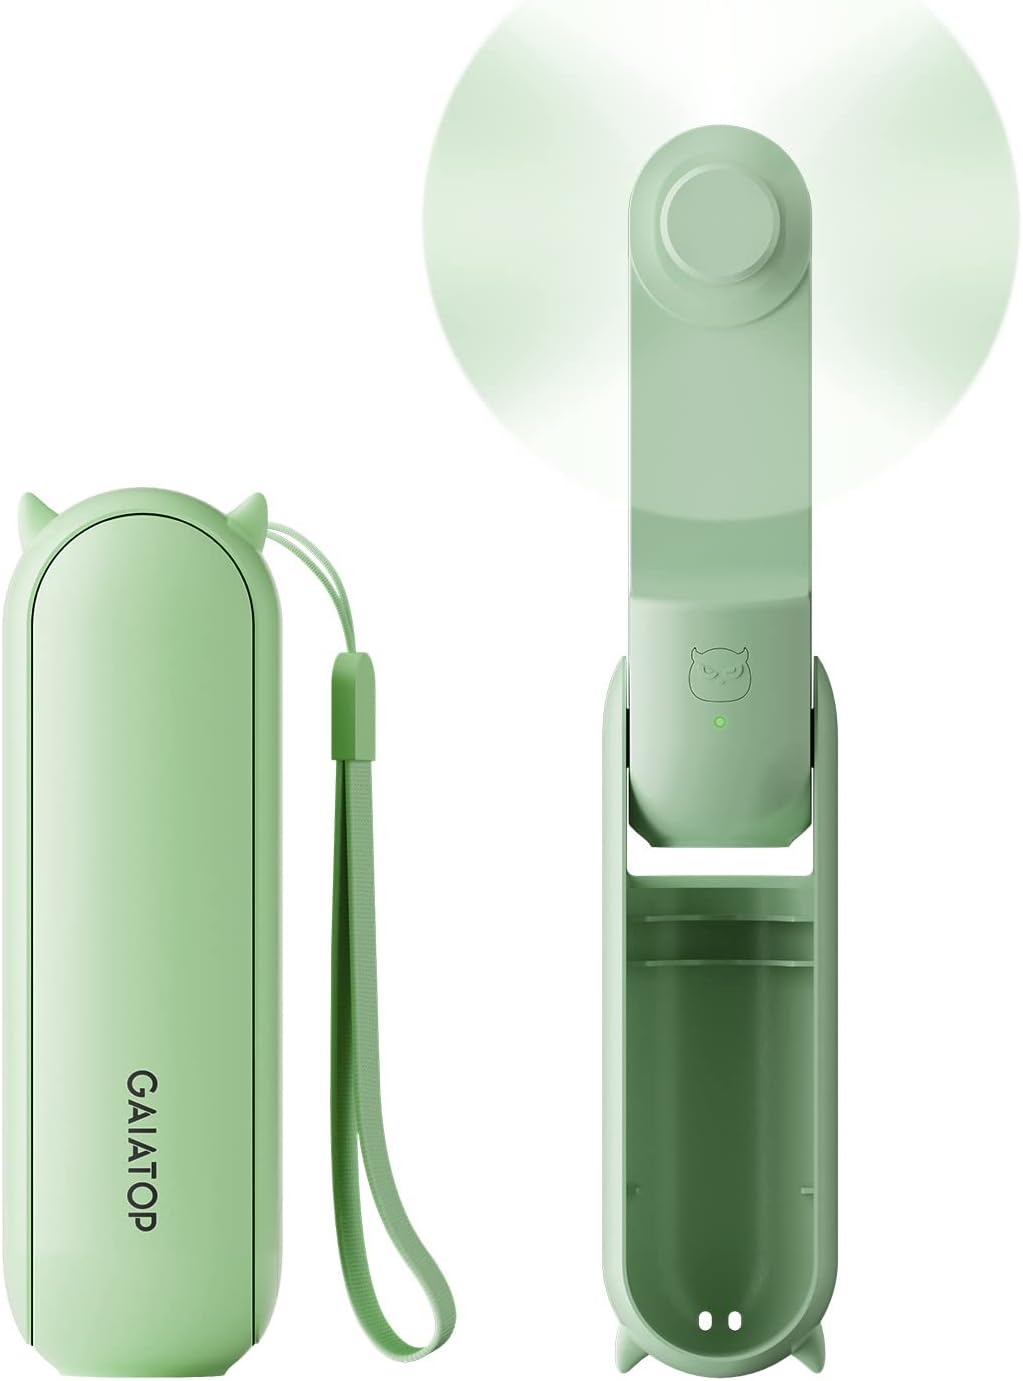 Small foldable handheld fan in seafoam green. It has a wrist strap and is made by Gaiatop.